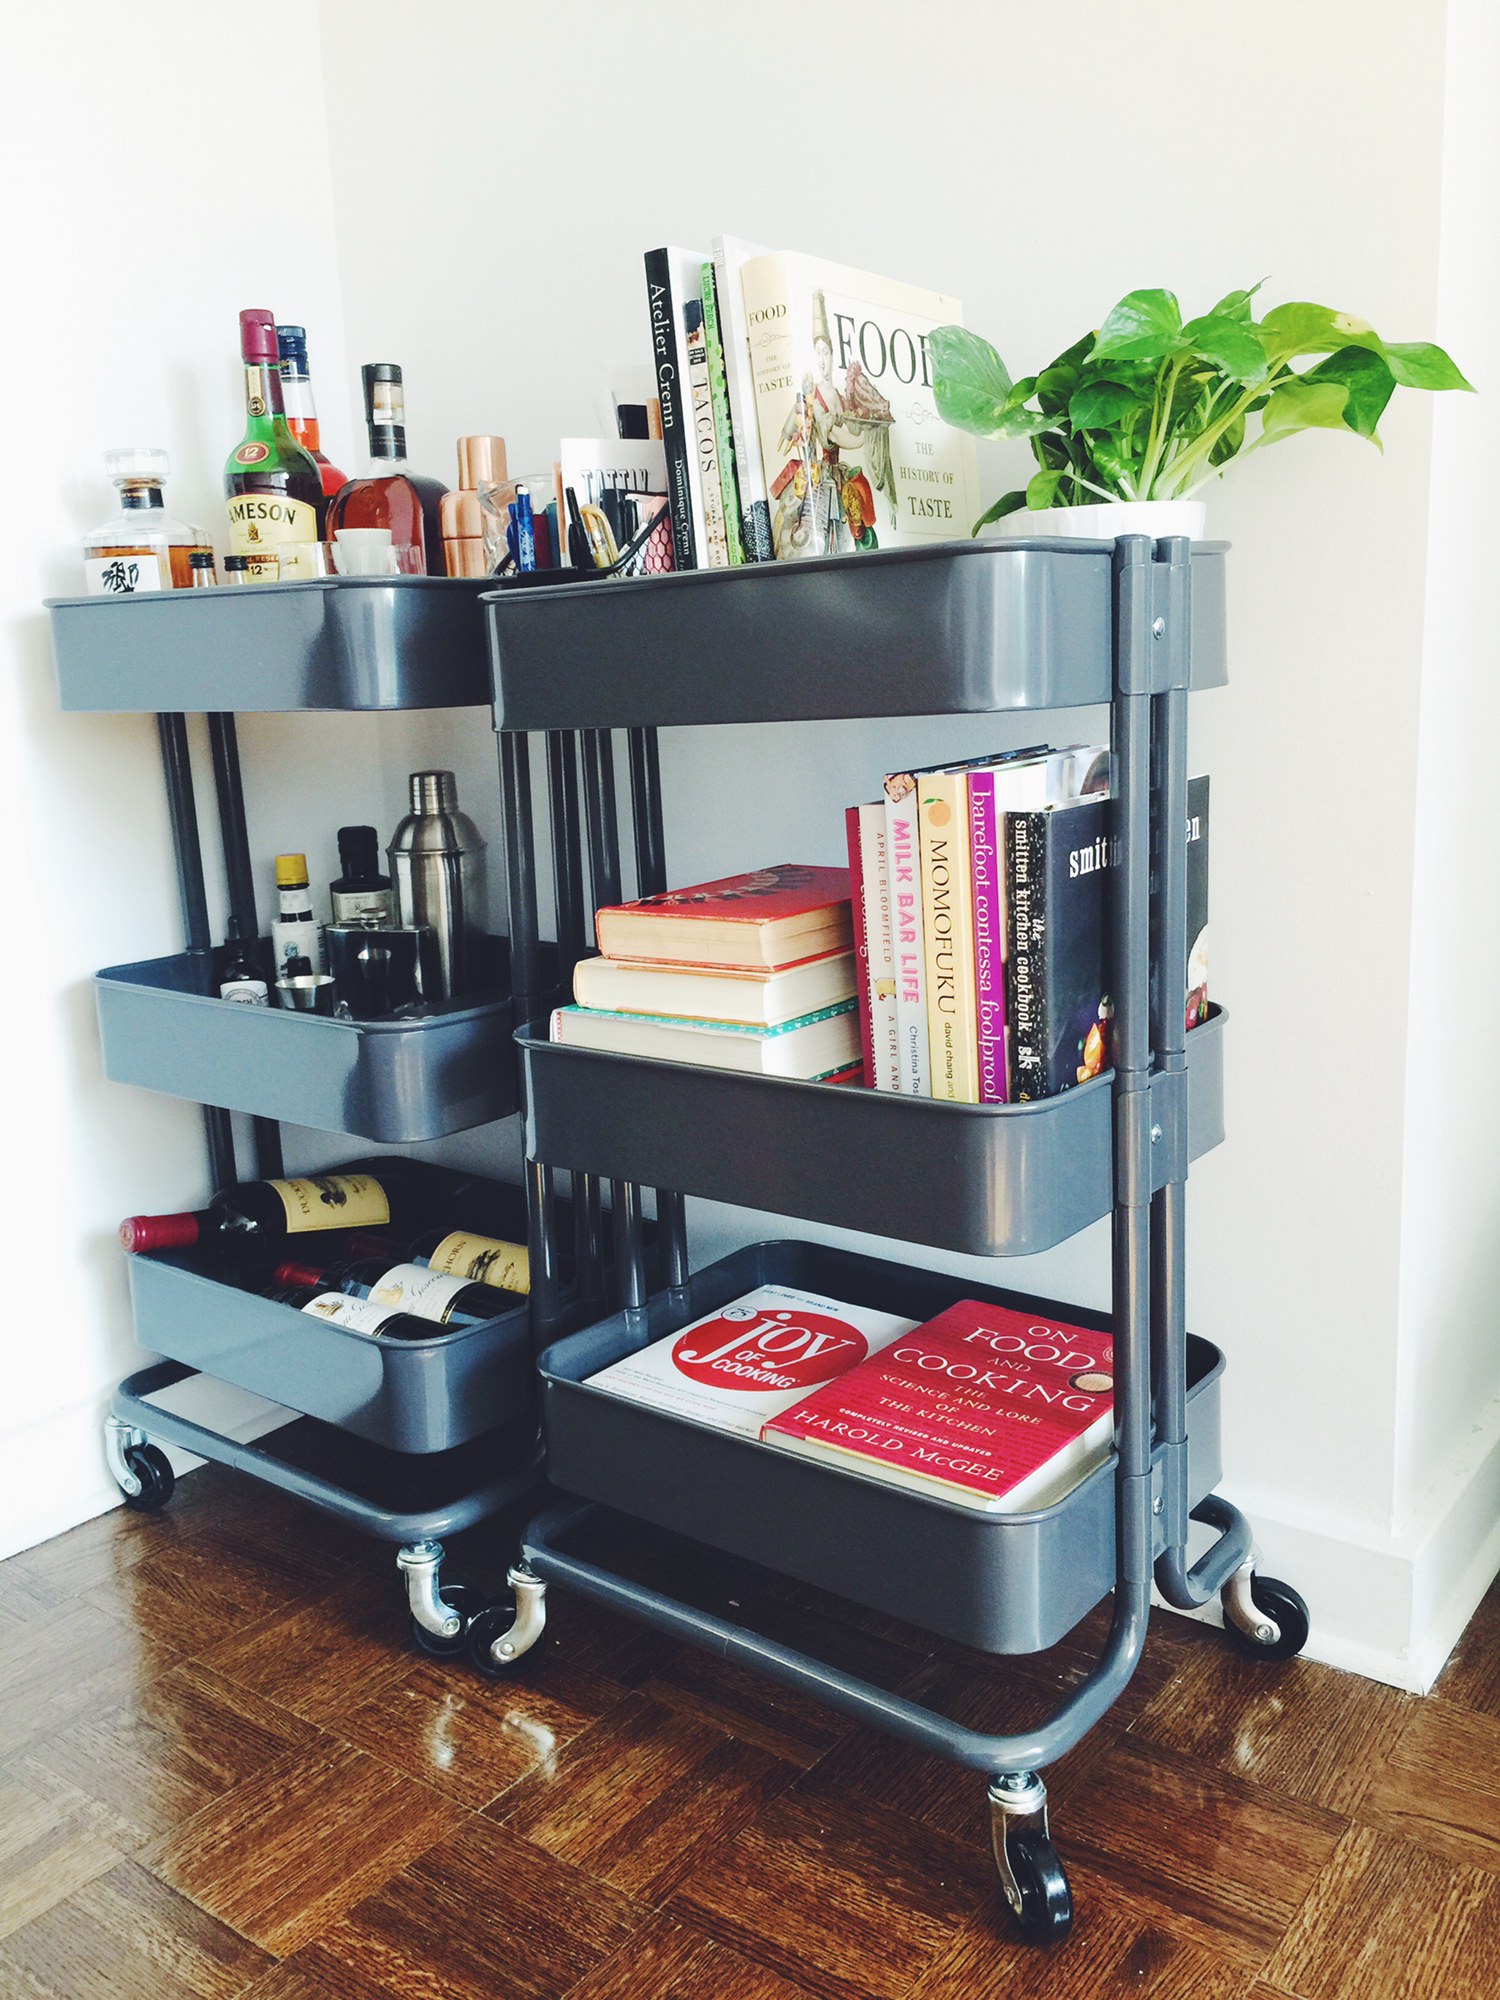 Two black carts here are used as a mixing station and as a storage rack for cooking books.